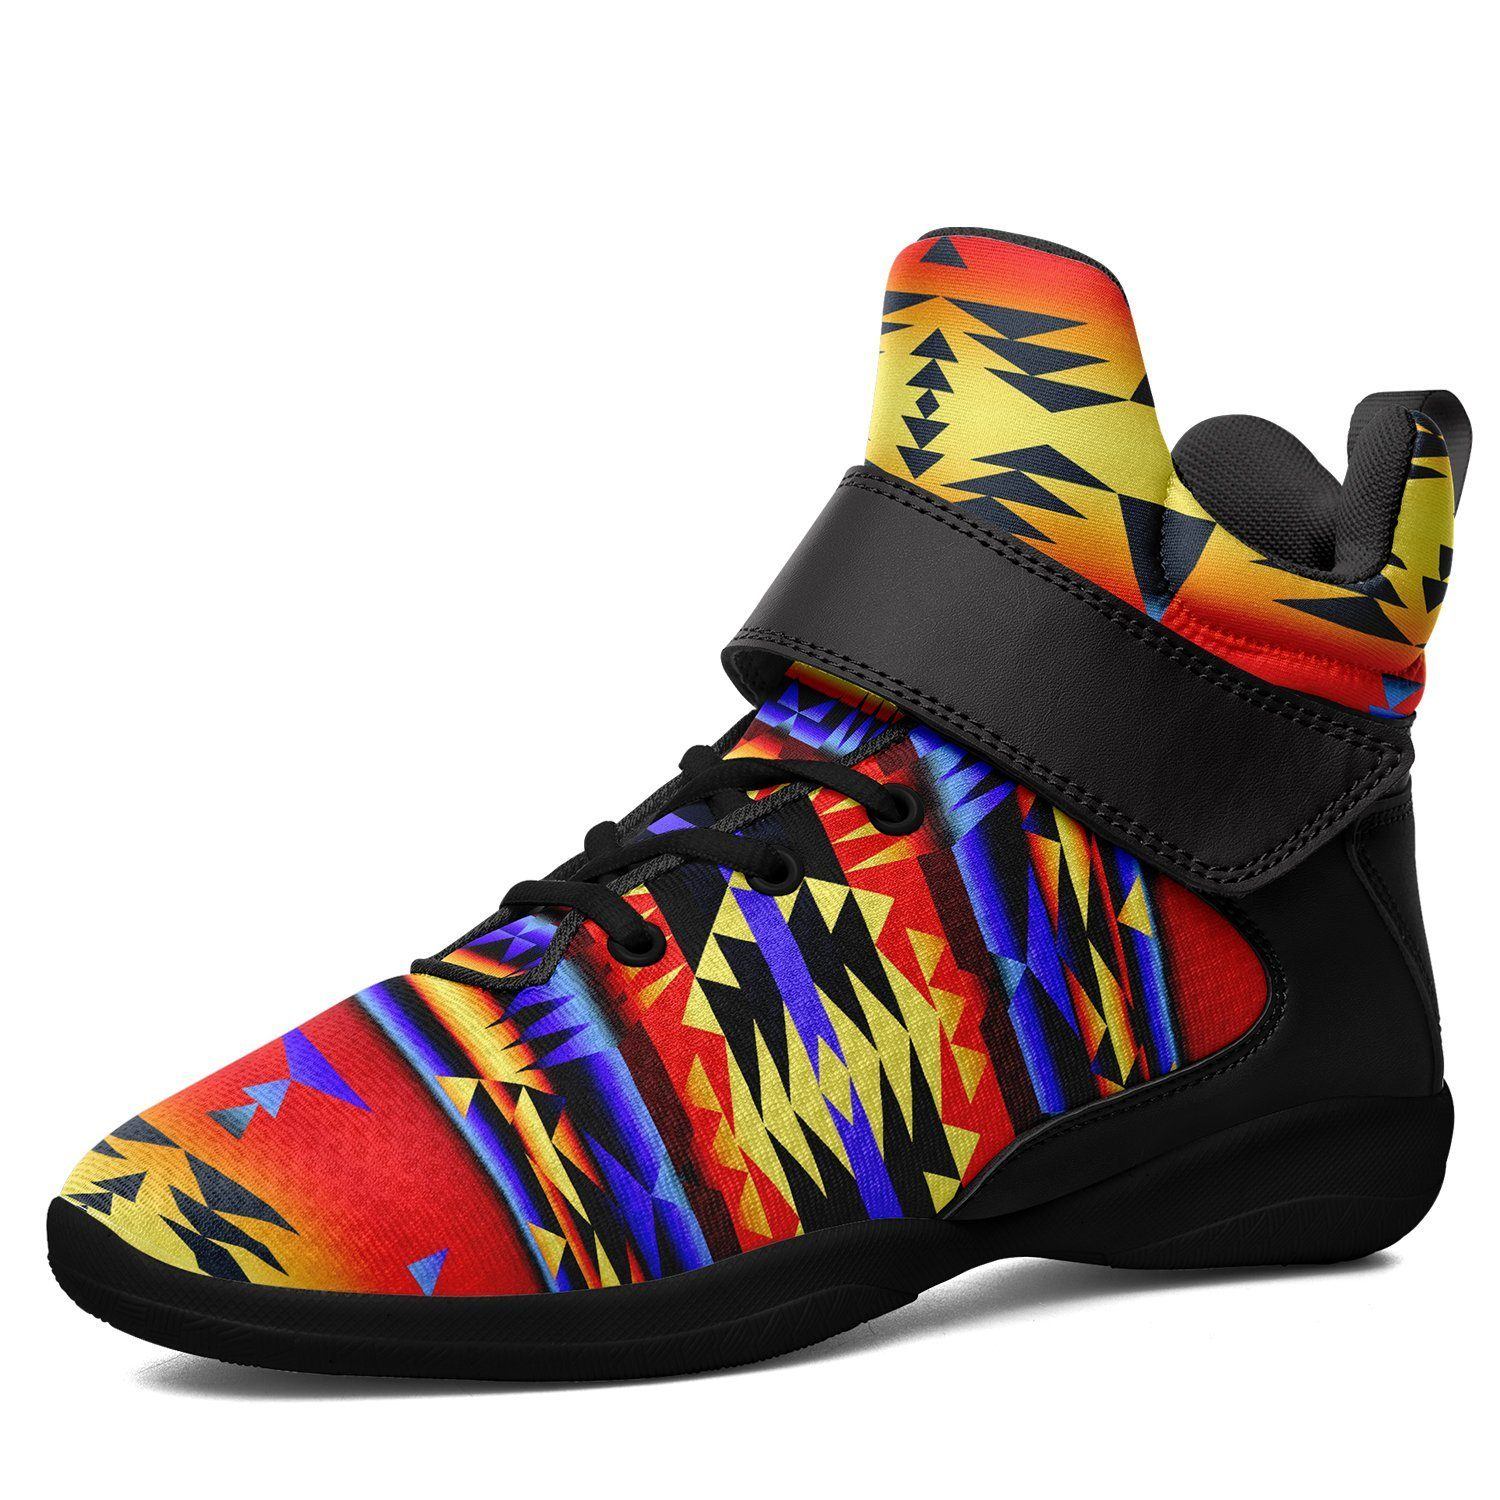 Between the San Juan Mountains Ipottaa Basketball / Sport High Top Shoes - Black Sole 49 Dzine US Men 7 / EUR 40 Black Sole with Black Strap 